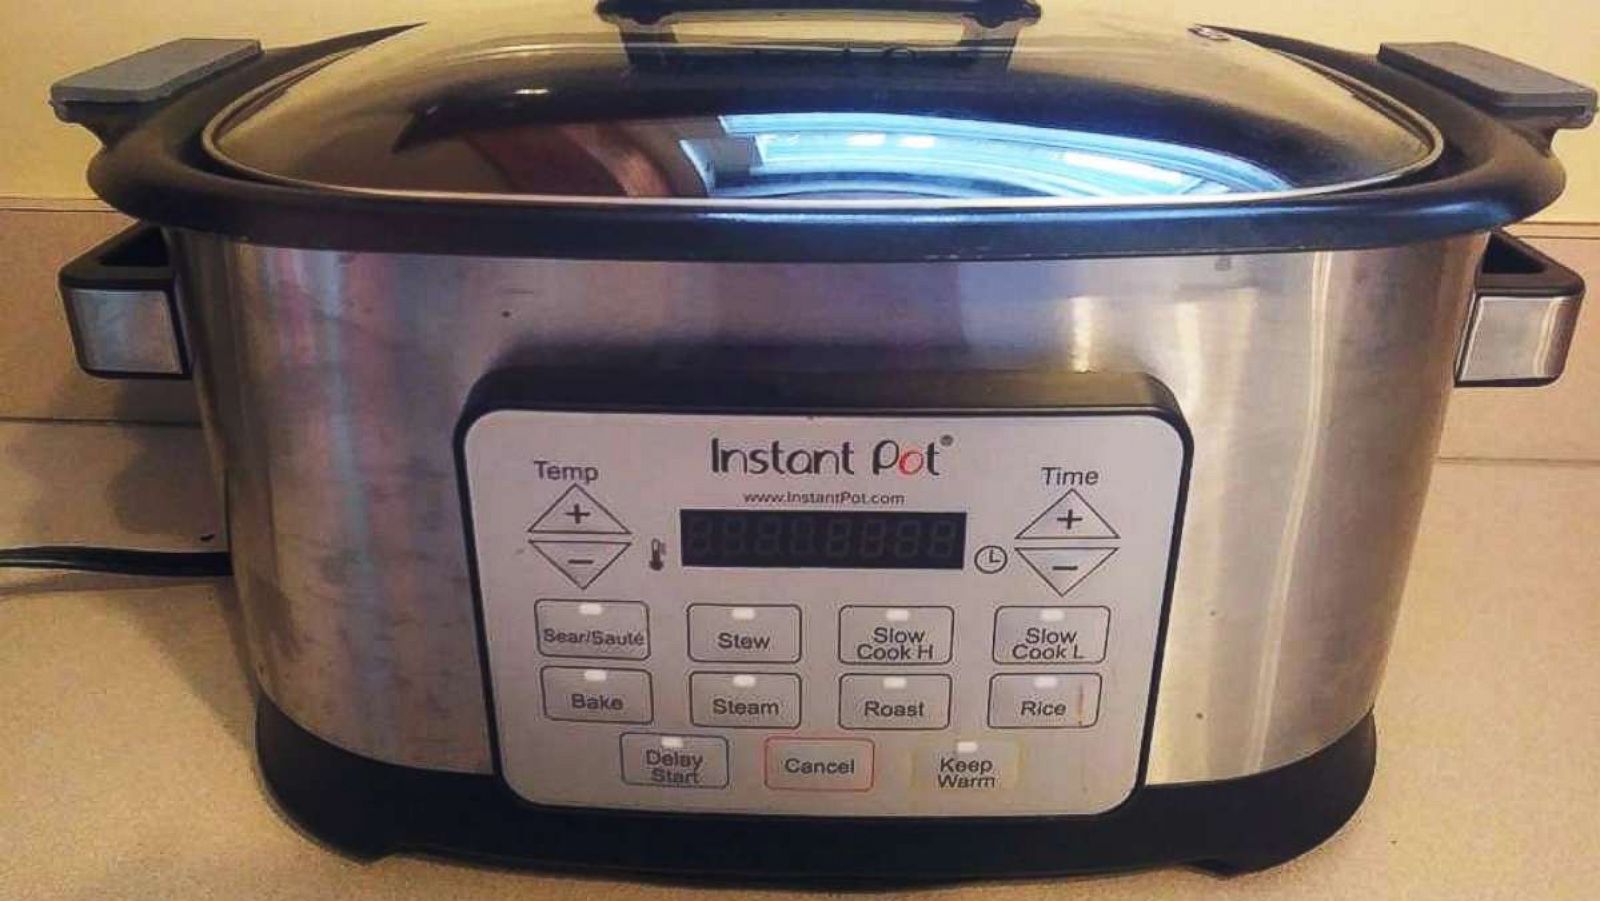 Instant Pot - Introducing the NEW Instant Pot Gem 8-in-1 Programmable  Multicooker 6 Quart 🙌 The Gem 8-in-1 Multicooker is built with Instant Pot®  Advanced Microprocessor Technology, the same technology behind the